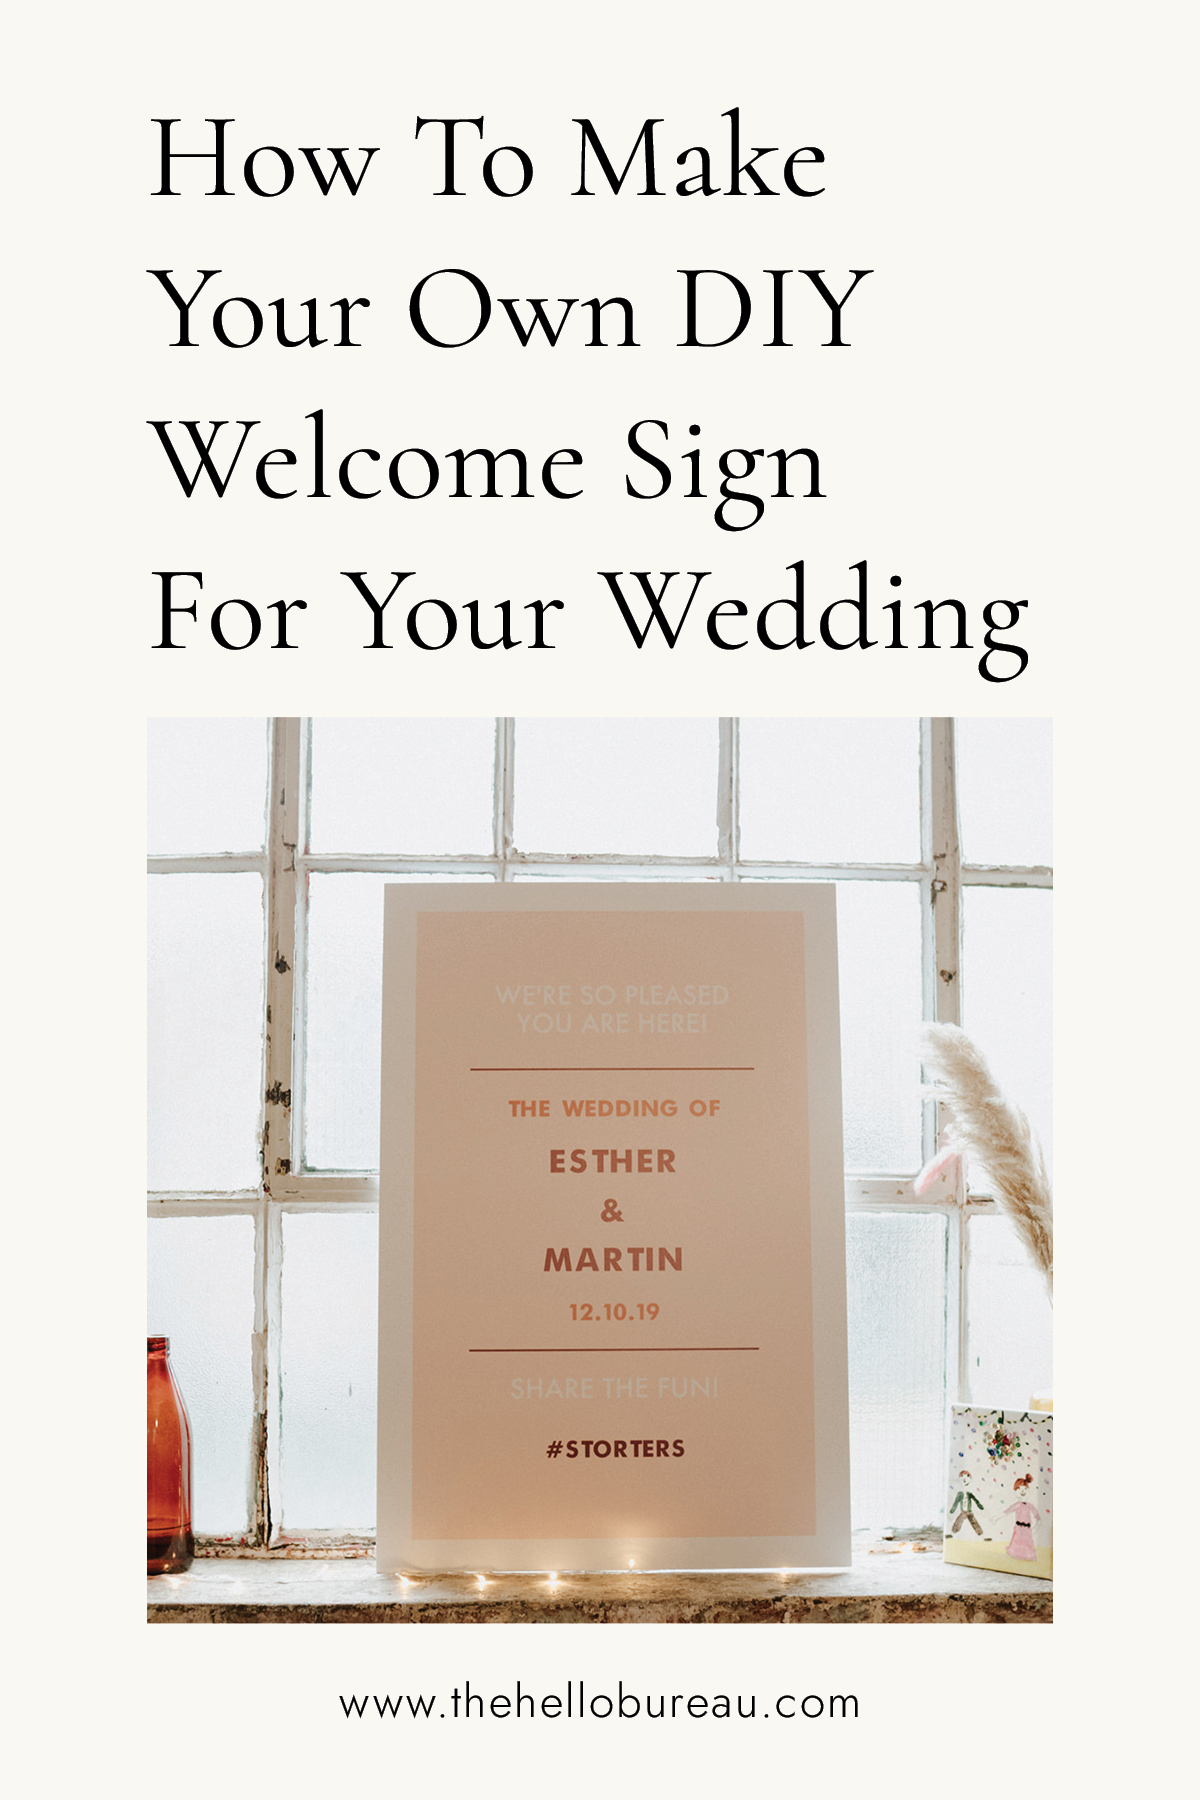 How To Make Your Own DIY Welcome Sign For Your Wedding